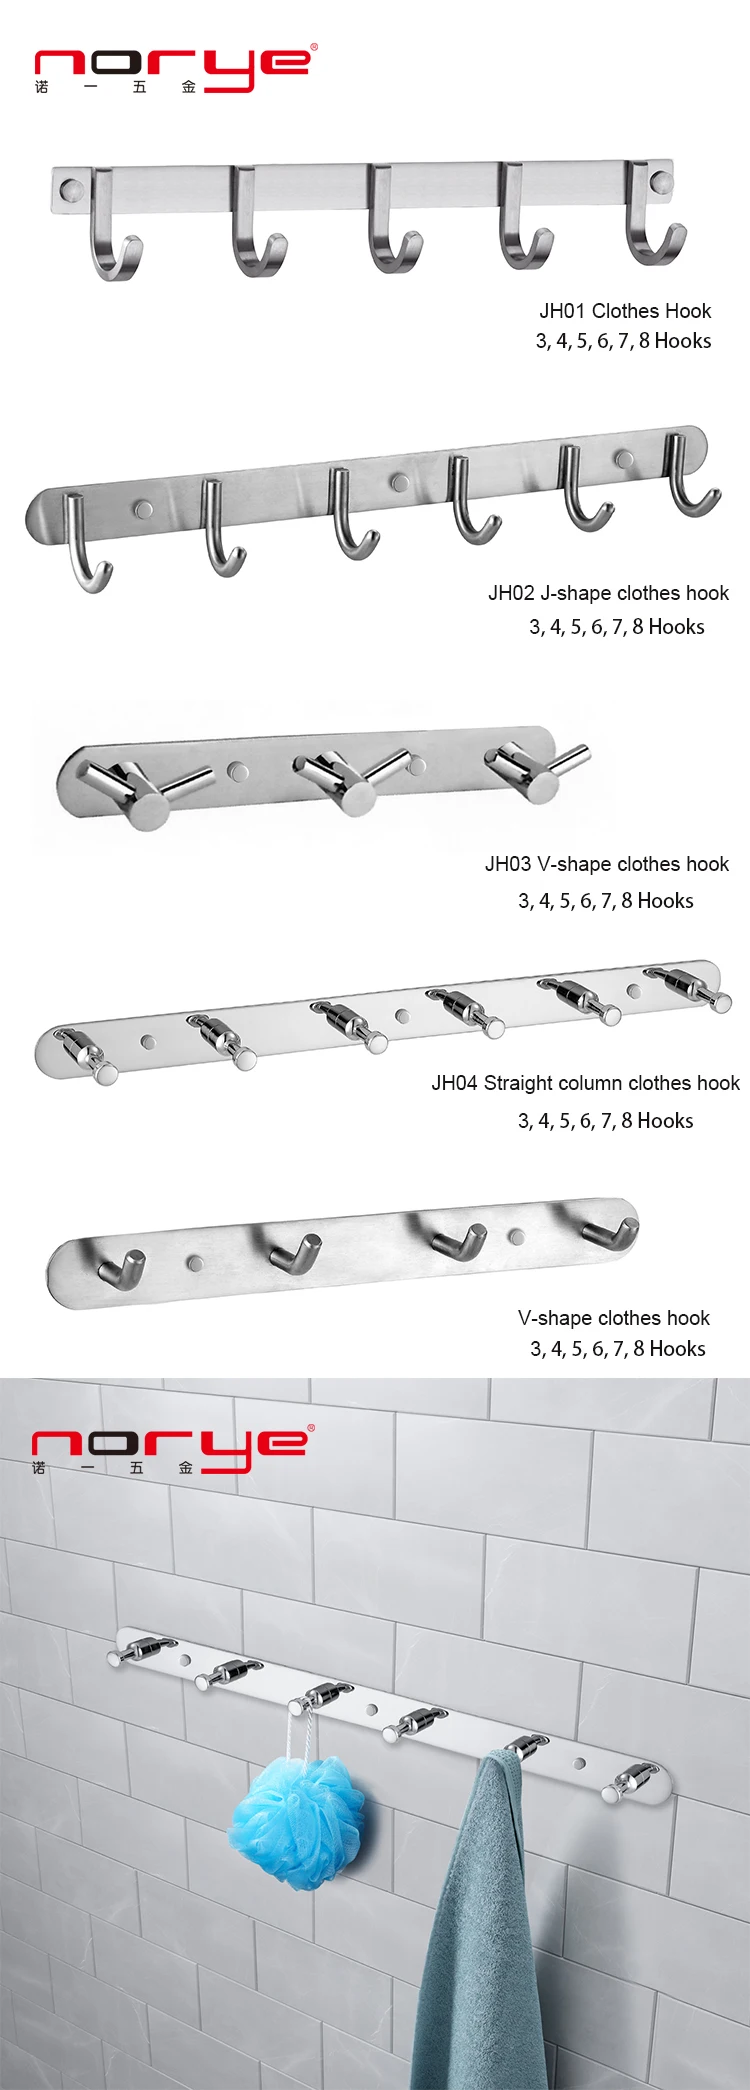 Factory Clothes towel hanging hooks Stainless steel Robe Hanger bathroom